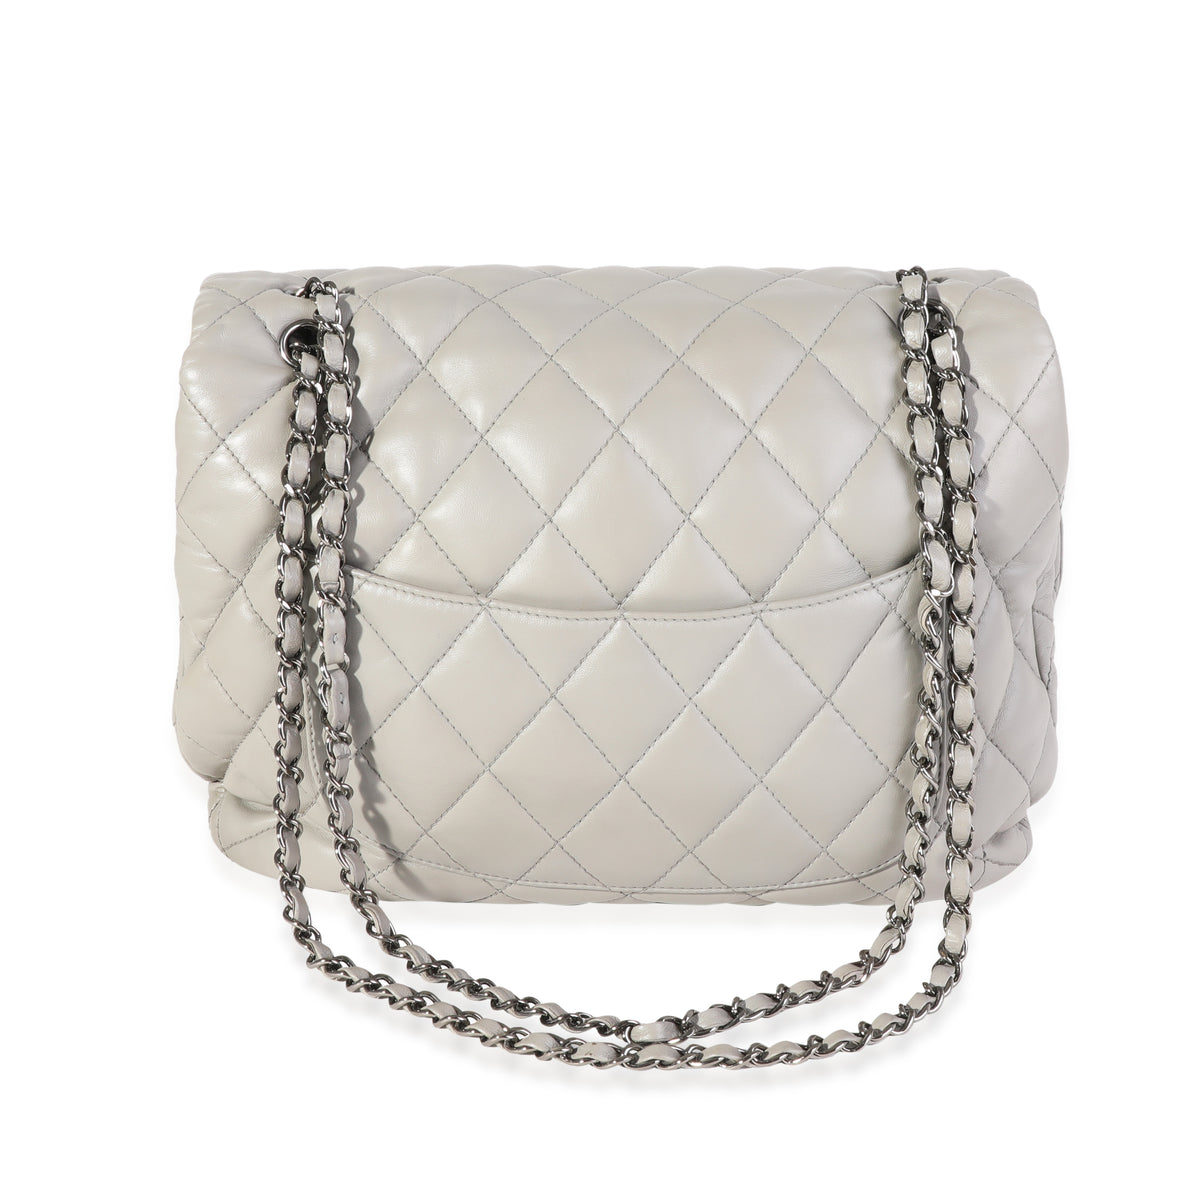 Chanel 3 Accordion Bag Quilted Lambskin Maxi